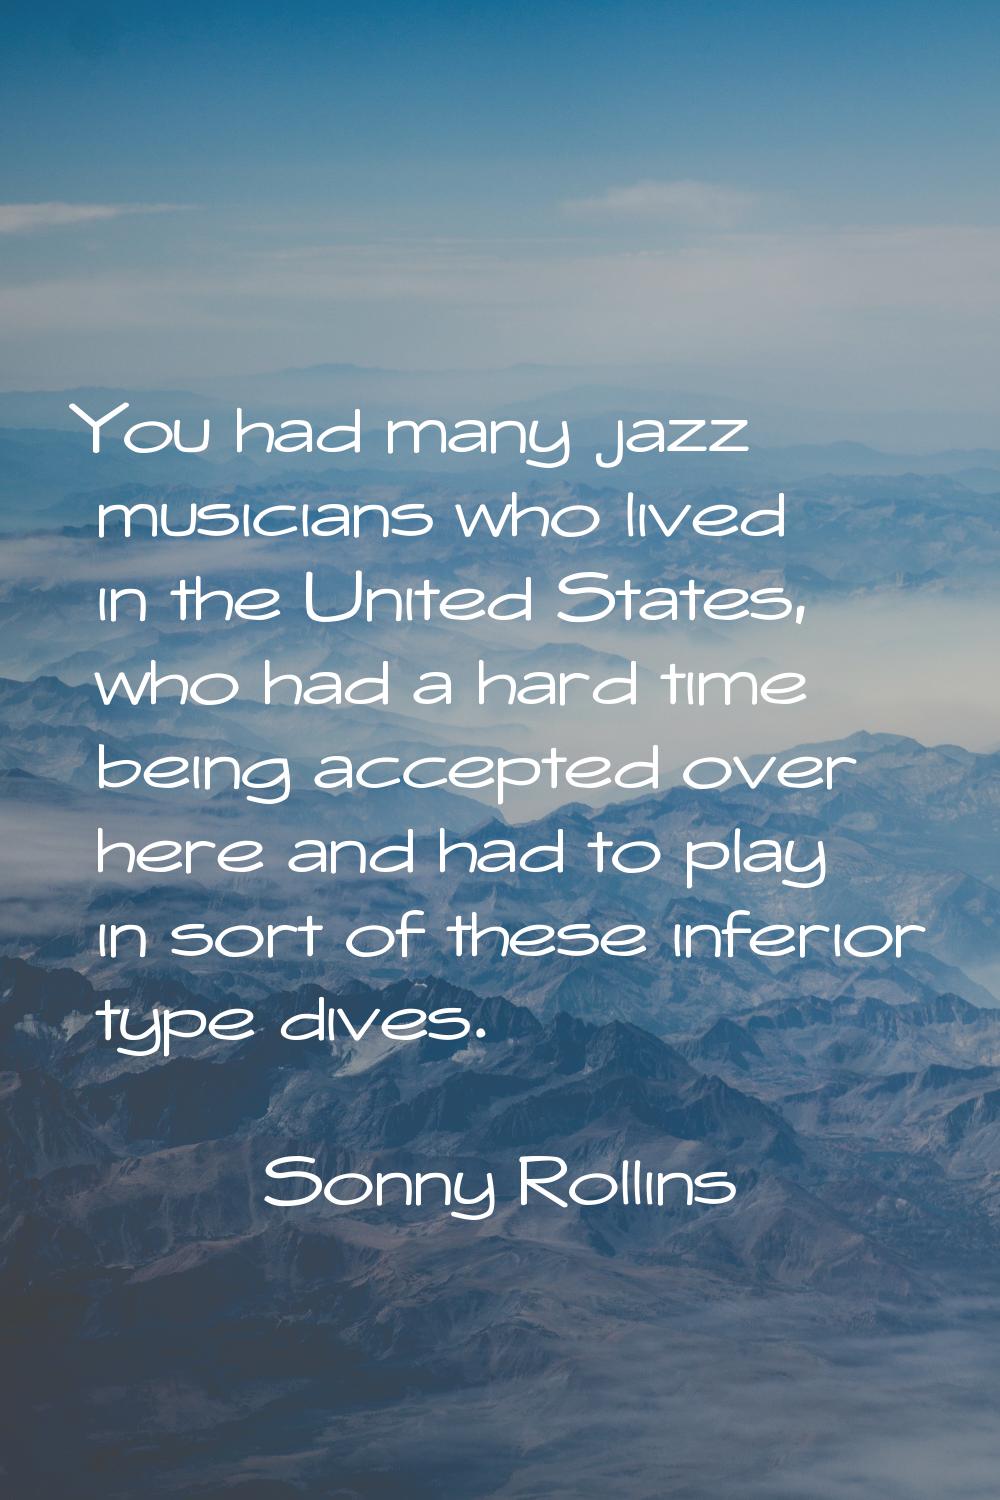 You had many jazz musicians who lived in the United States, who had a hard time being accepted over